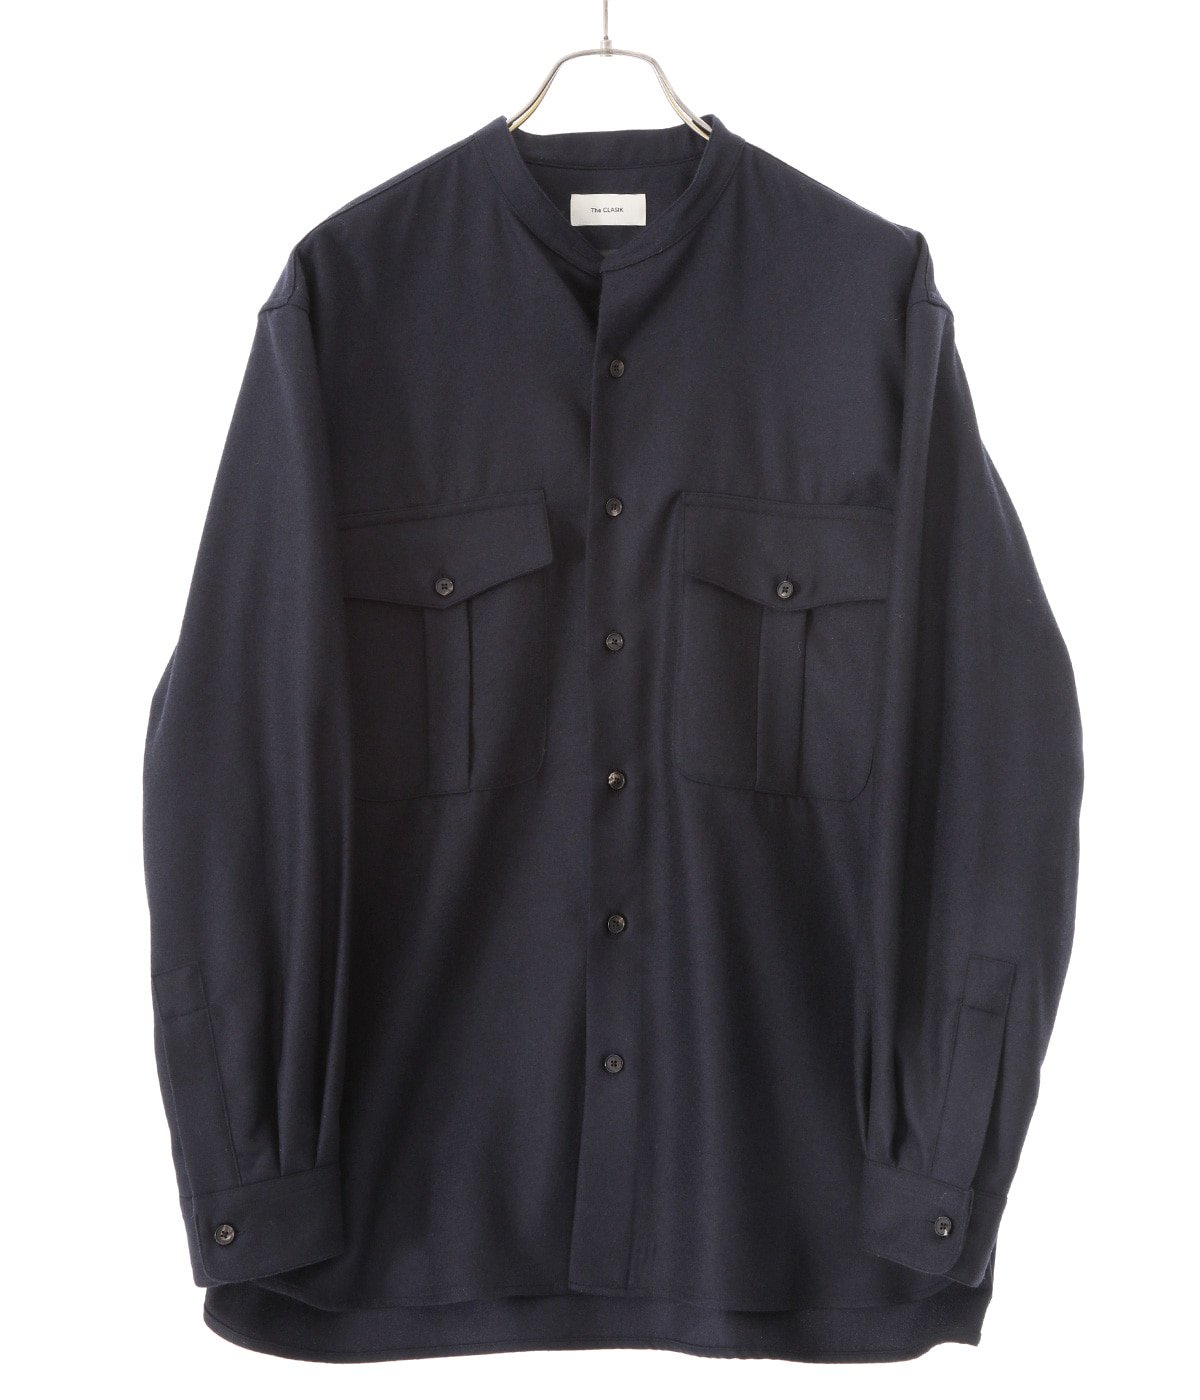 ROYAL AIR FORCE SHIRT | The CLASIK(ザ クラシック) / トップス 長袖シャツ (メンズ)の通販 -  ARKnets(アークネッツ) 公式通販 【正規取扱店】